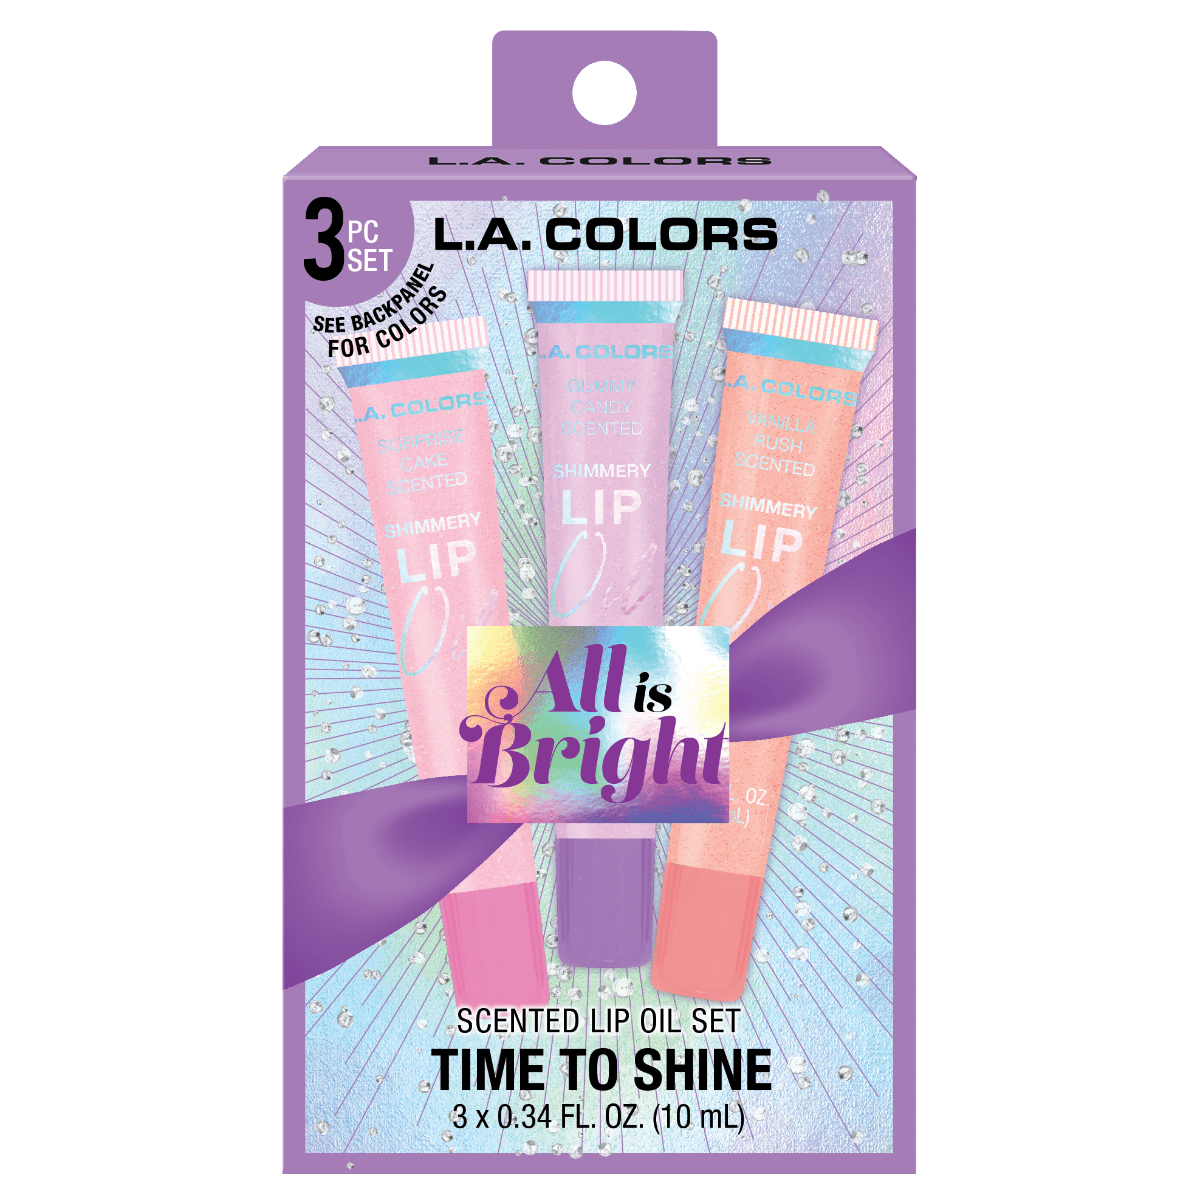 Set De Navidad L.A. Colors Lip Oil Time To Shine In Shimmers - Aceite